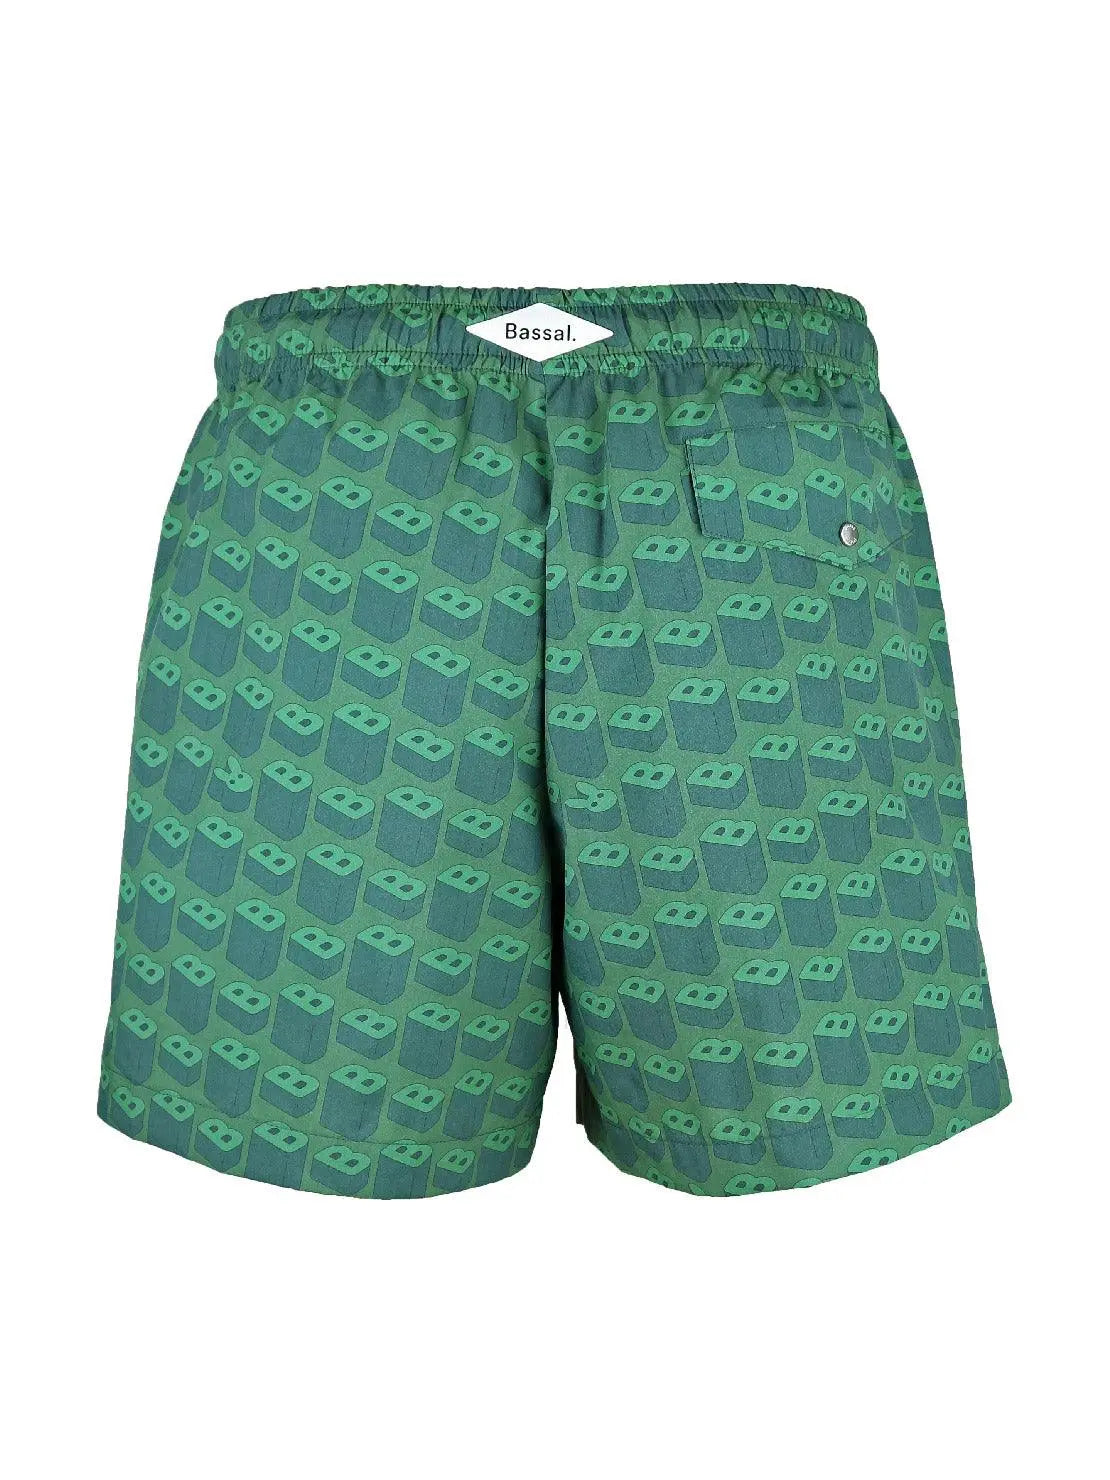 A pair of B's Green Swimwear with a pattern of small green 3D glasses displayed on a mannequin against a white curtain backdrop. The swimwear has an elastic waistband with a drawstring. In the foreground, there is a large green monstera leaf and a small rock on a circular wooden stand from Bassal in Barcelona.